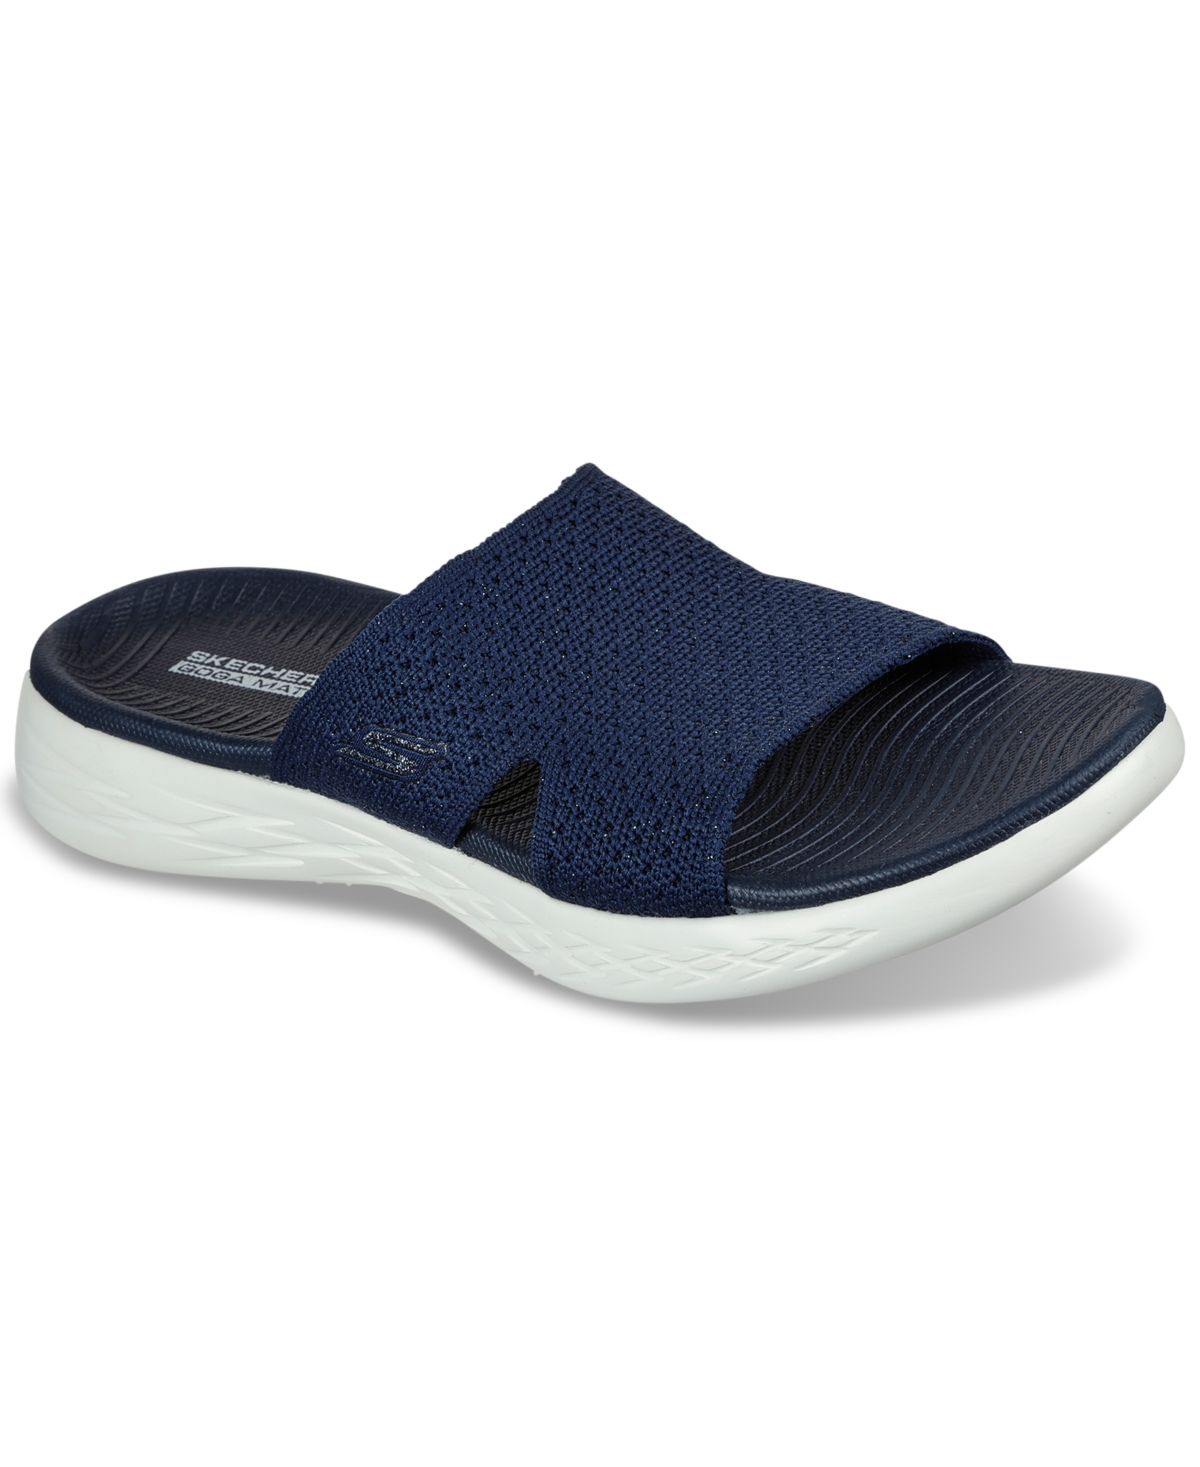 Women's On-the-go 600 - Adore Slide Sandals from Finish Line - Navy